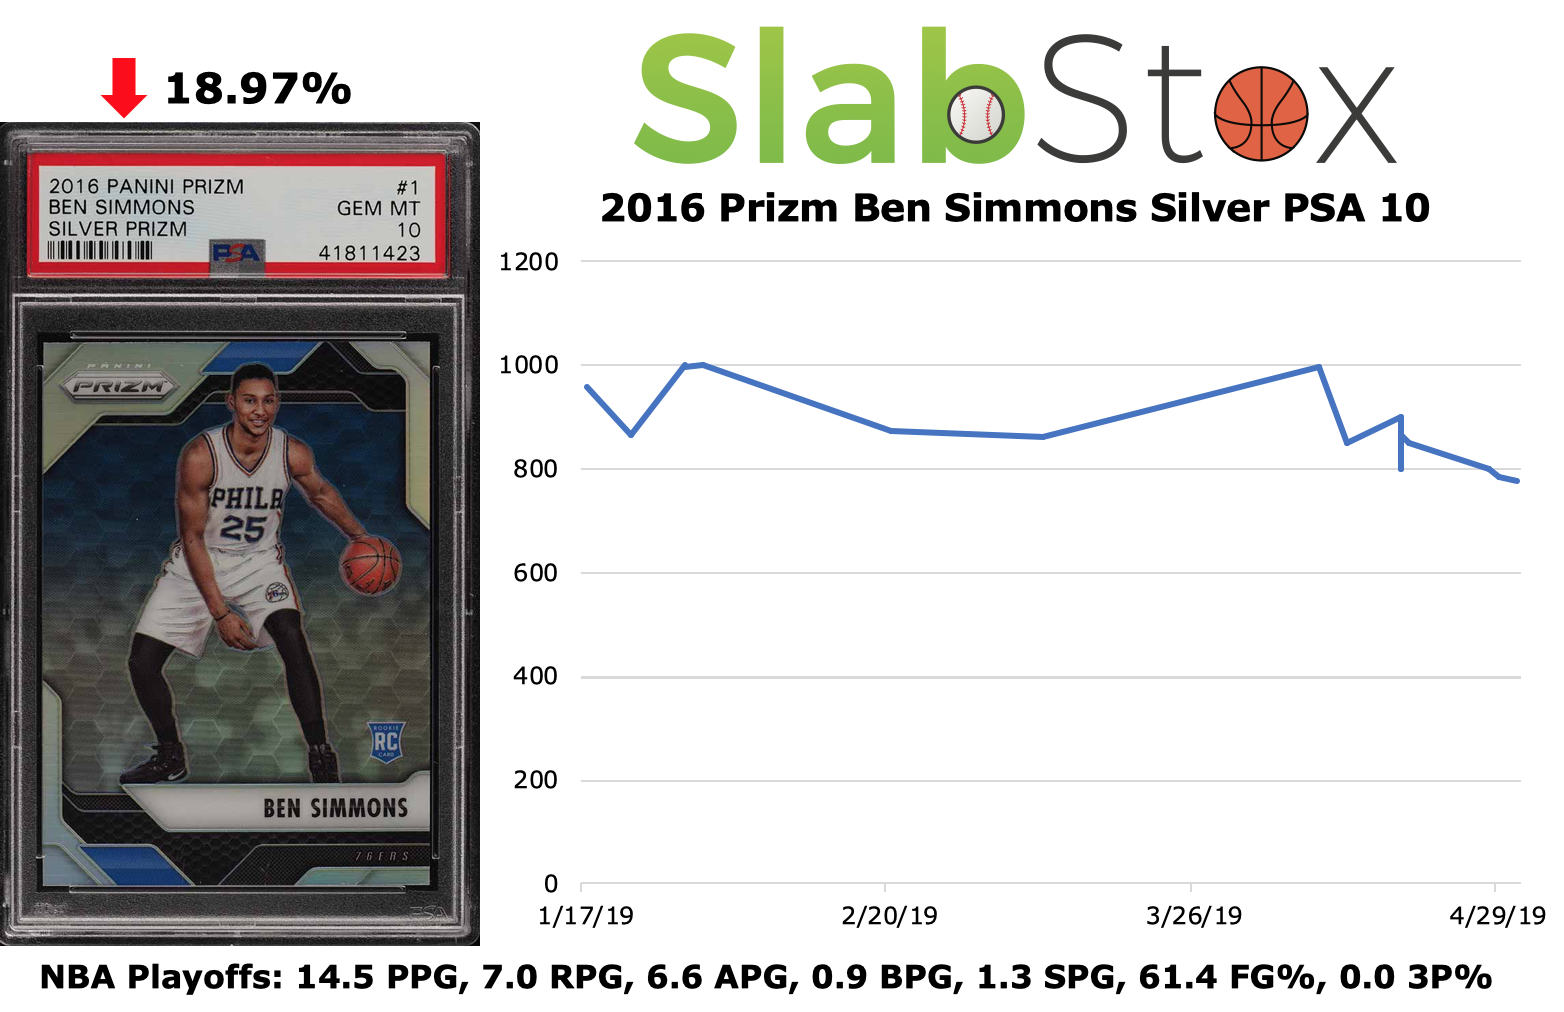 Graphic image of 2016 Prizm Ben Simmons Silver PSA 10 sports trading card by SlabStox